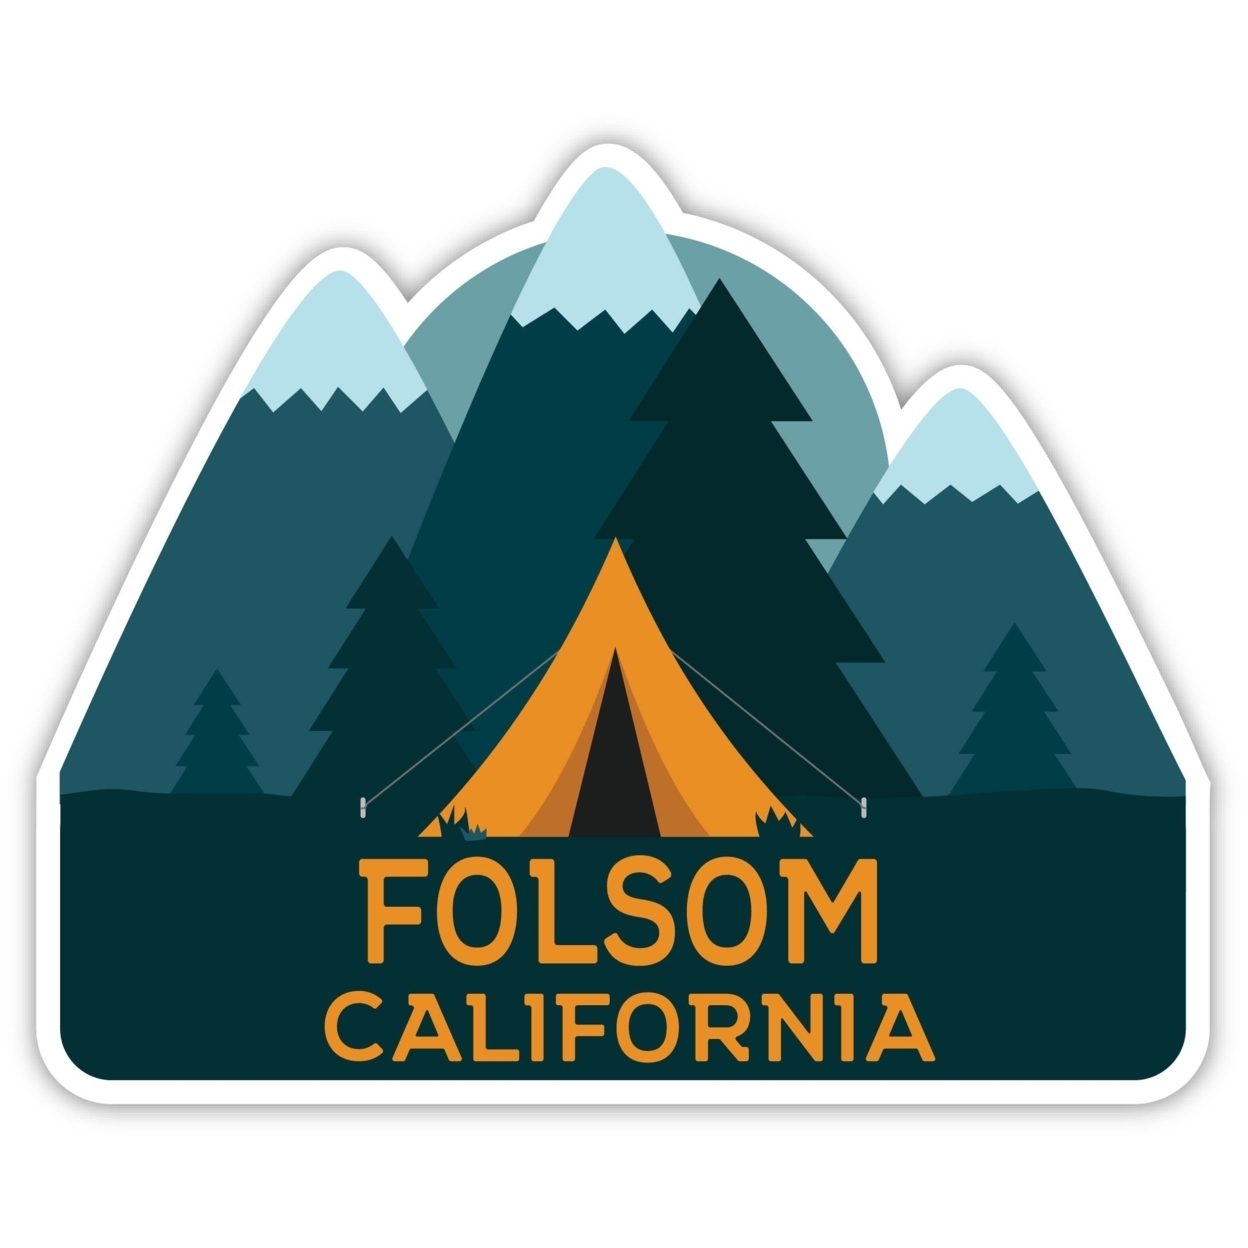 Folsom California Souvenir Decorative Stickers (Choose Theme And Size) - 4-Pack, 4-Inch, Bear